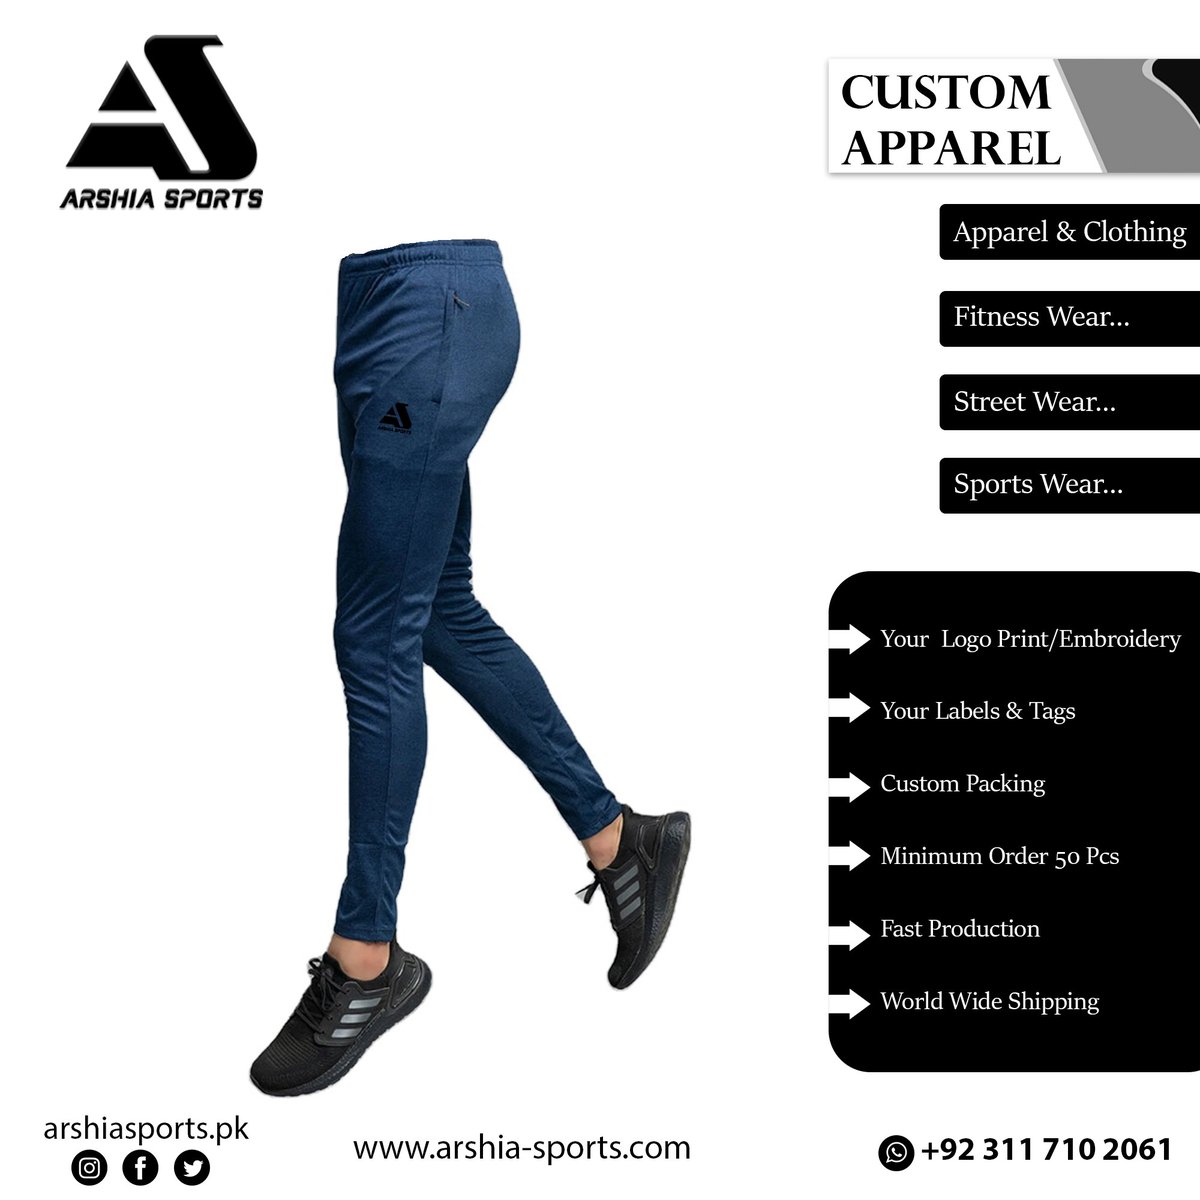 #alibaba
arshiasports.trustpass.alibaba.com
We Are Manufacture And Exporter Of All Kind of Sport's Wear's Fitness Wear Gym Wear , Jackets & Track Suits etc.
👉 We are customized it with your custom design and logo.
#trouser #gym #gymtrousers #gymwear #casualtrouser #casualwear #fashion